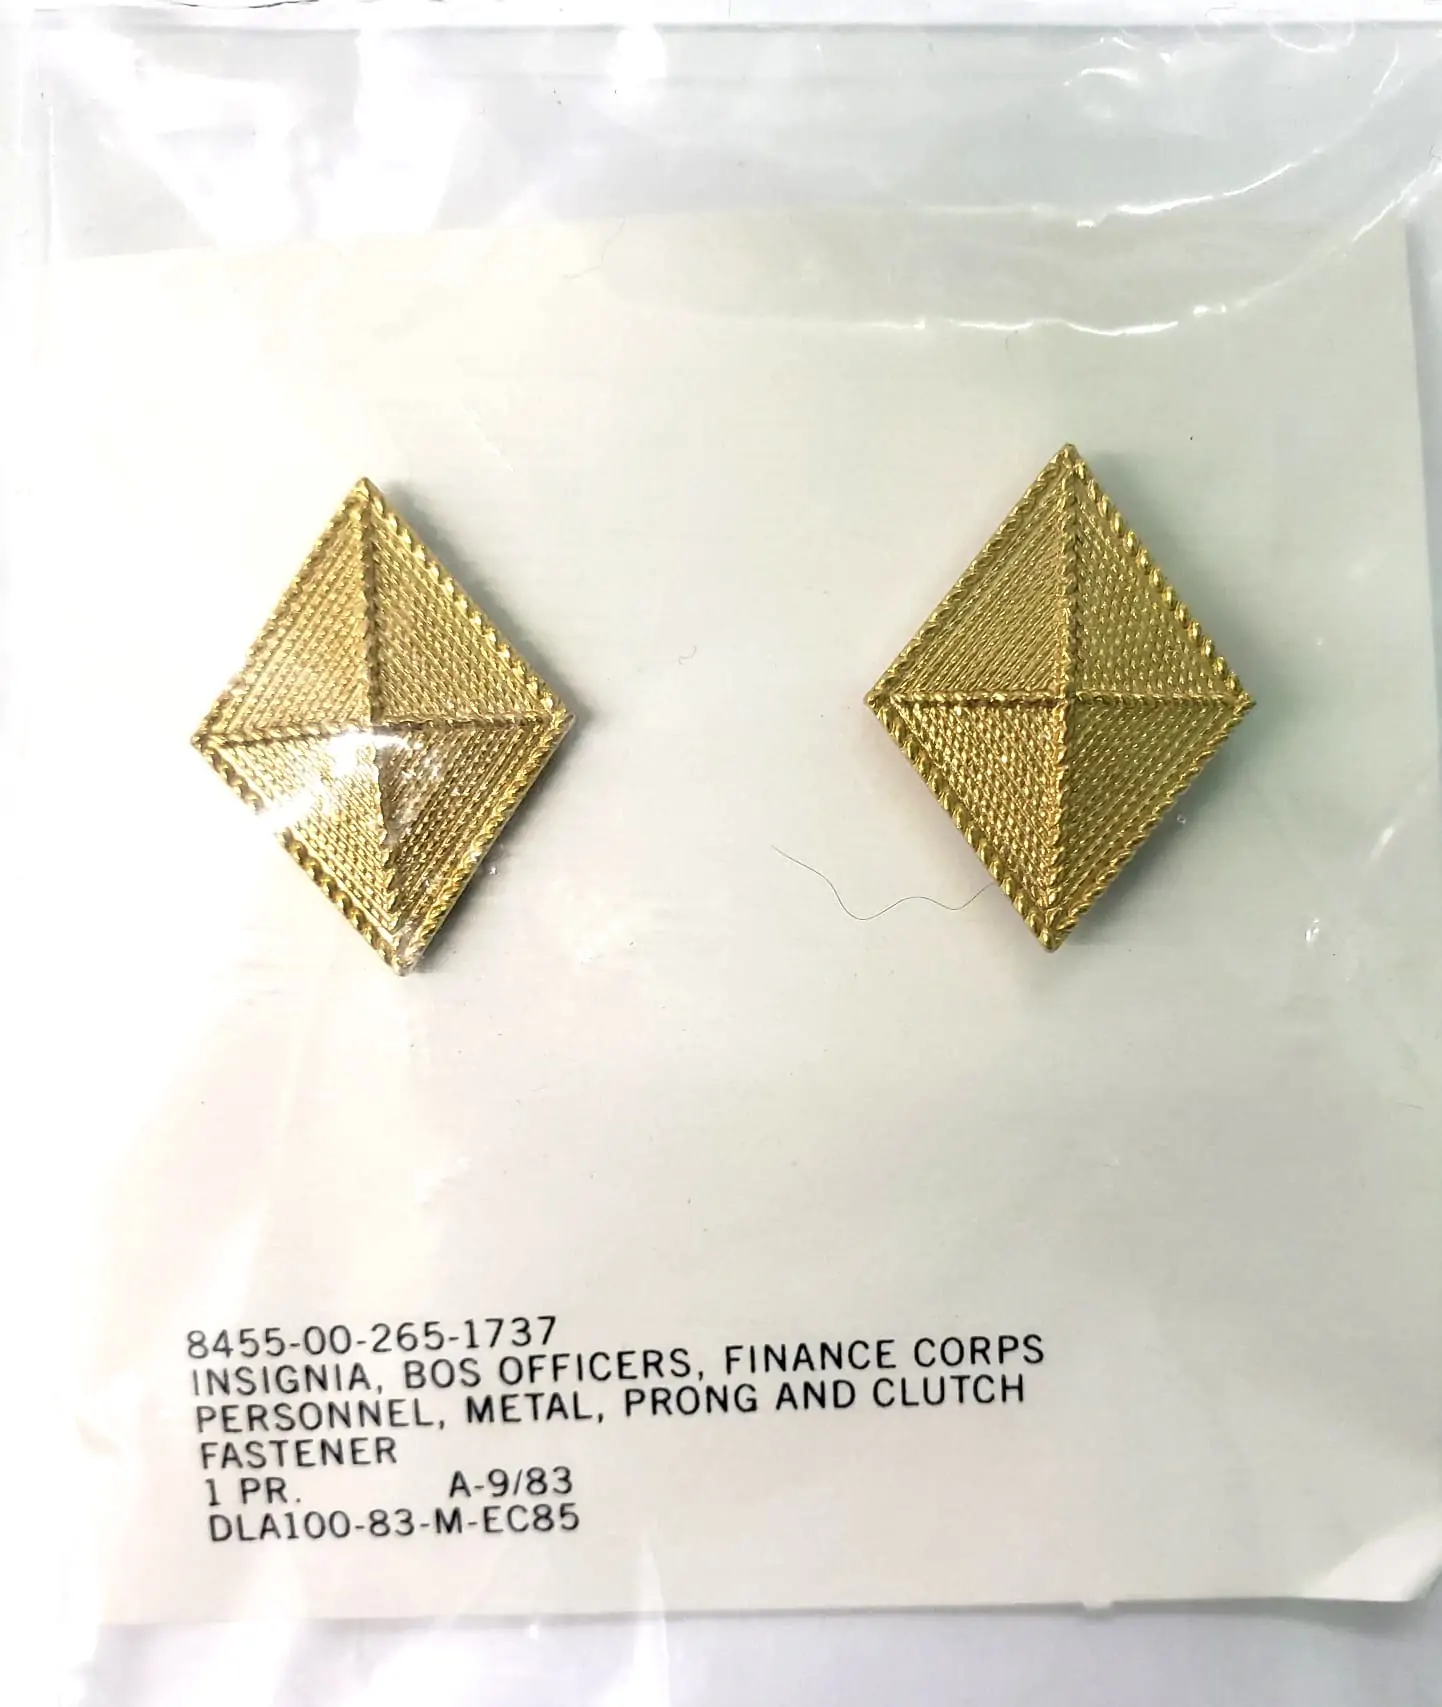 GI Army Finance Corps Officer Pair